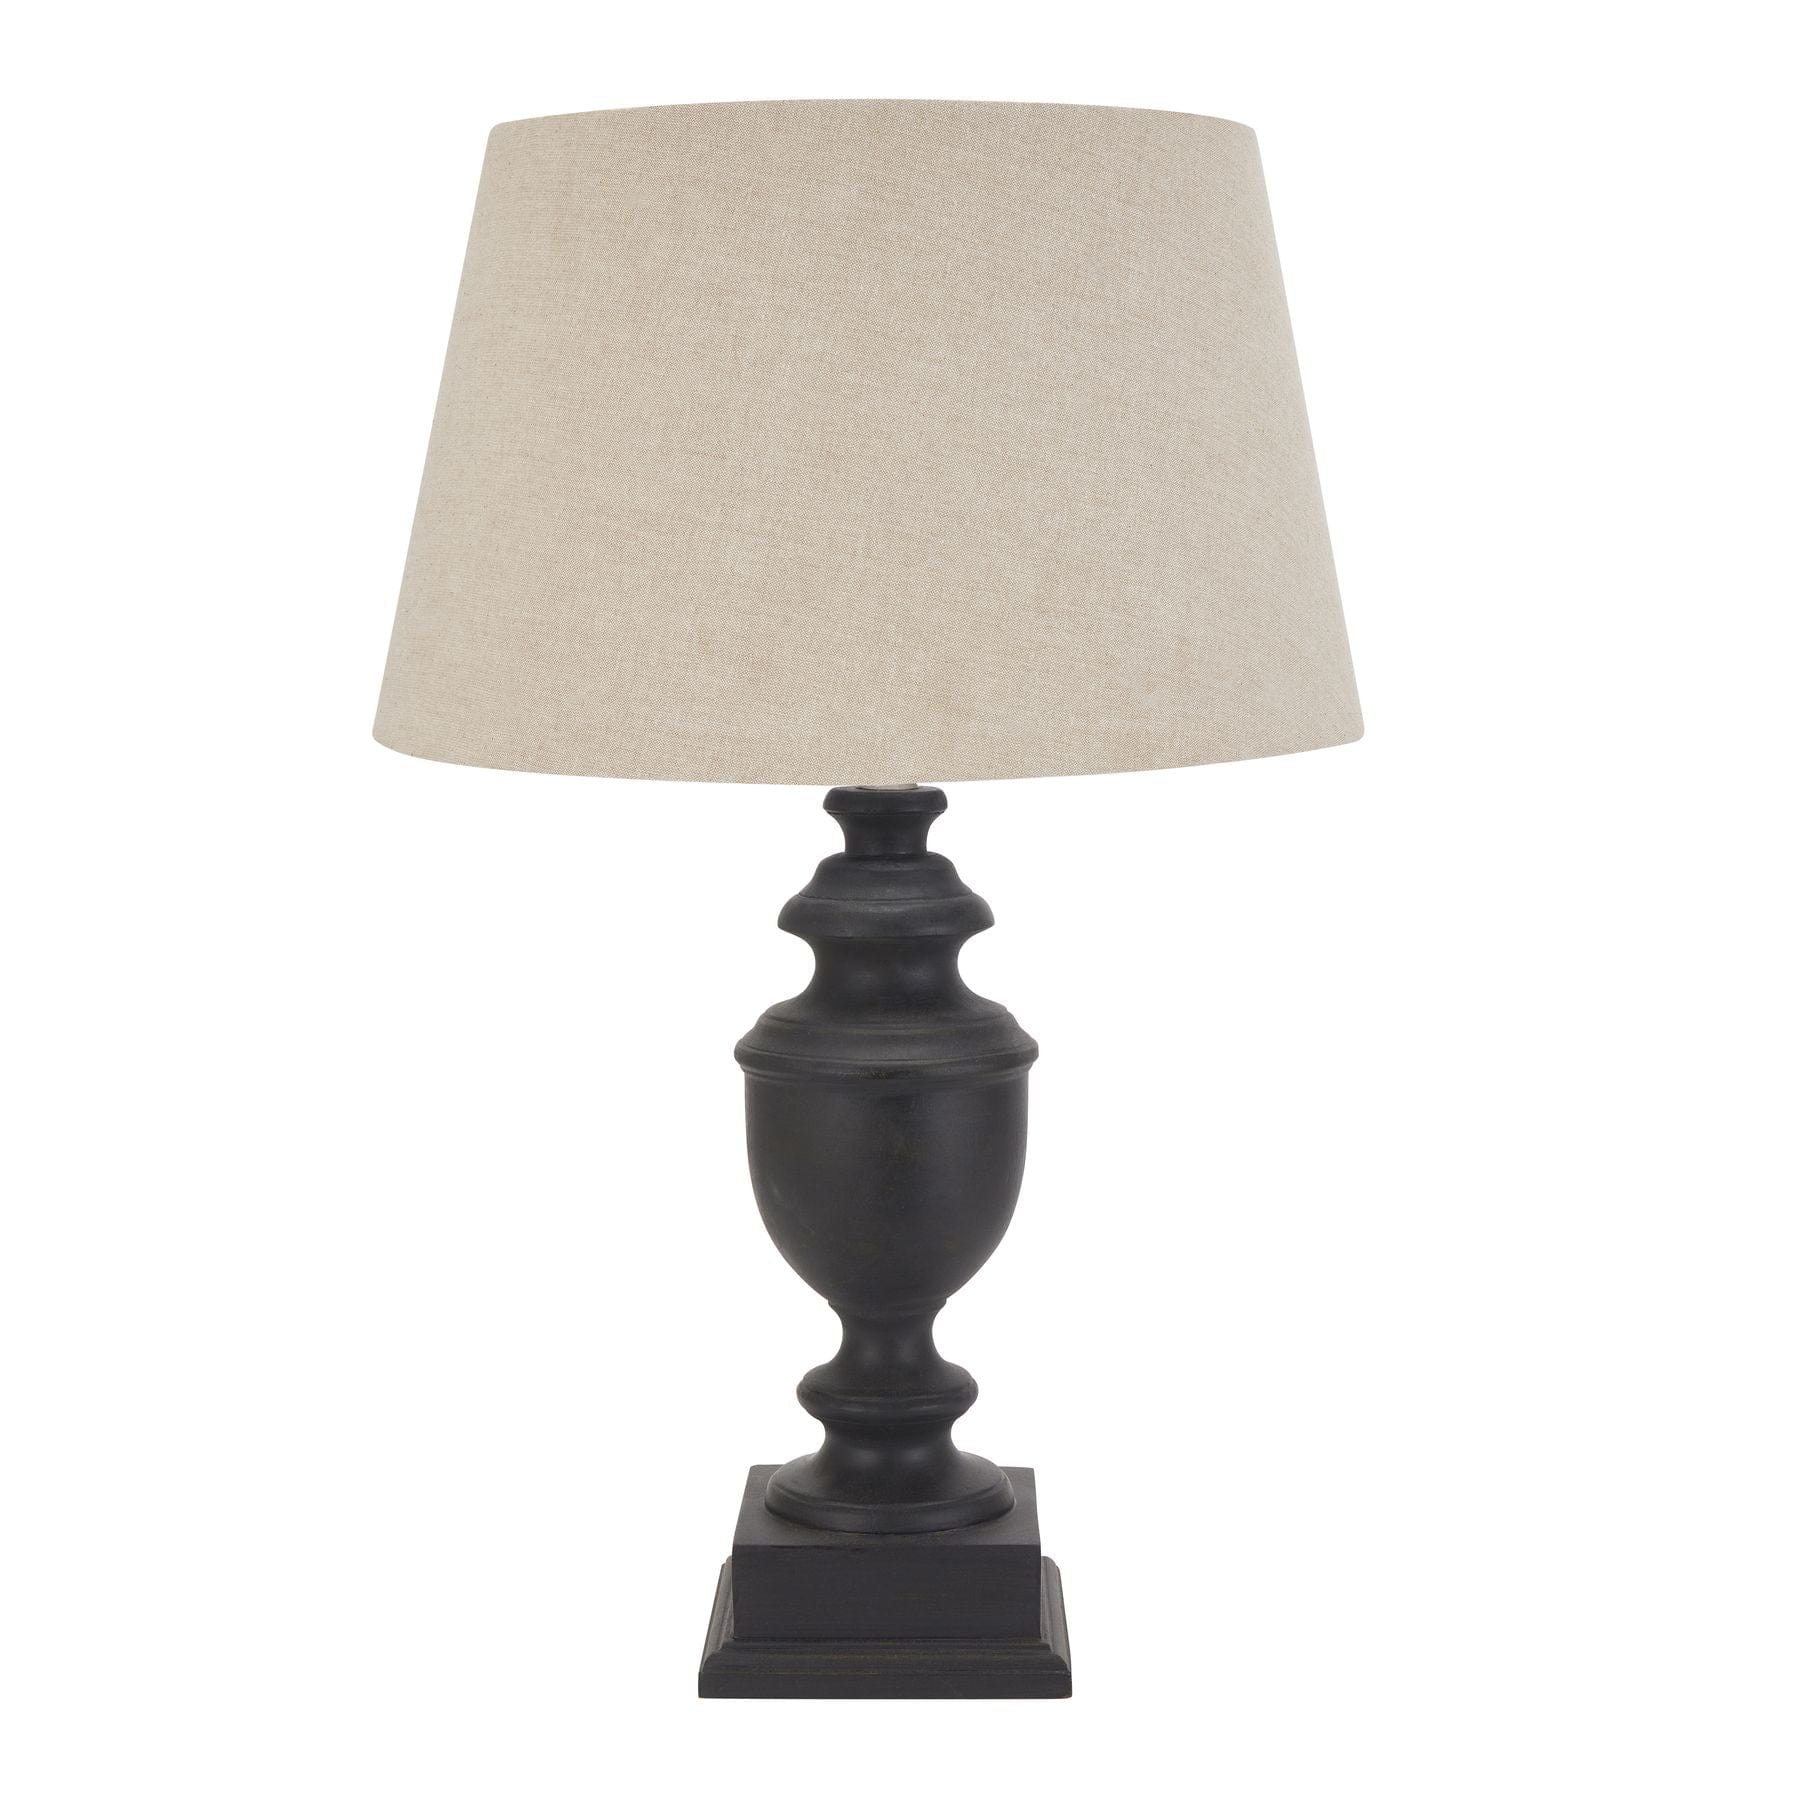 Hill Interiors Table Lamp Delaney Collection Grey Urn Table amp With Linen Shade